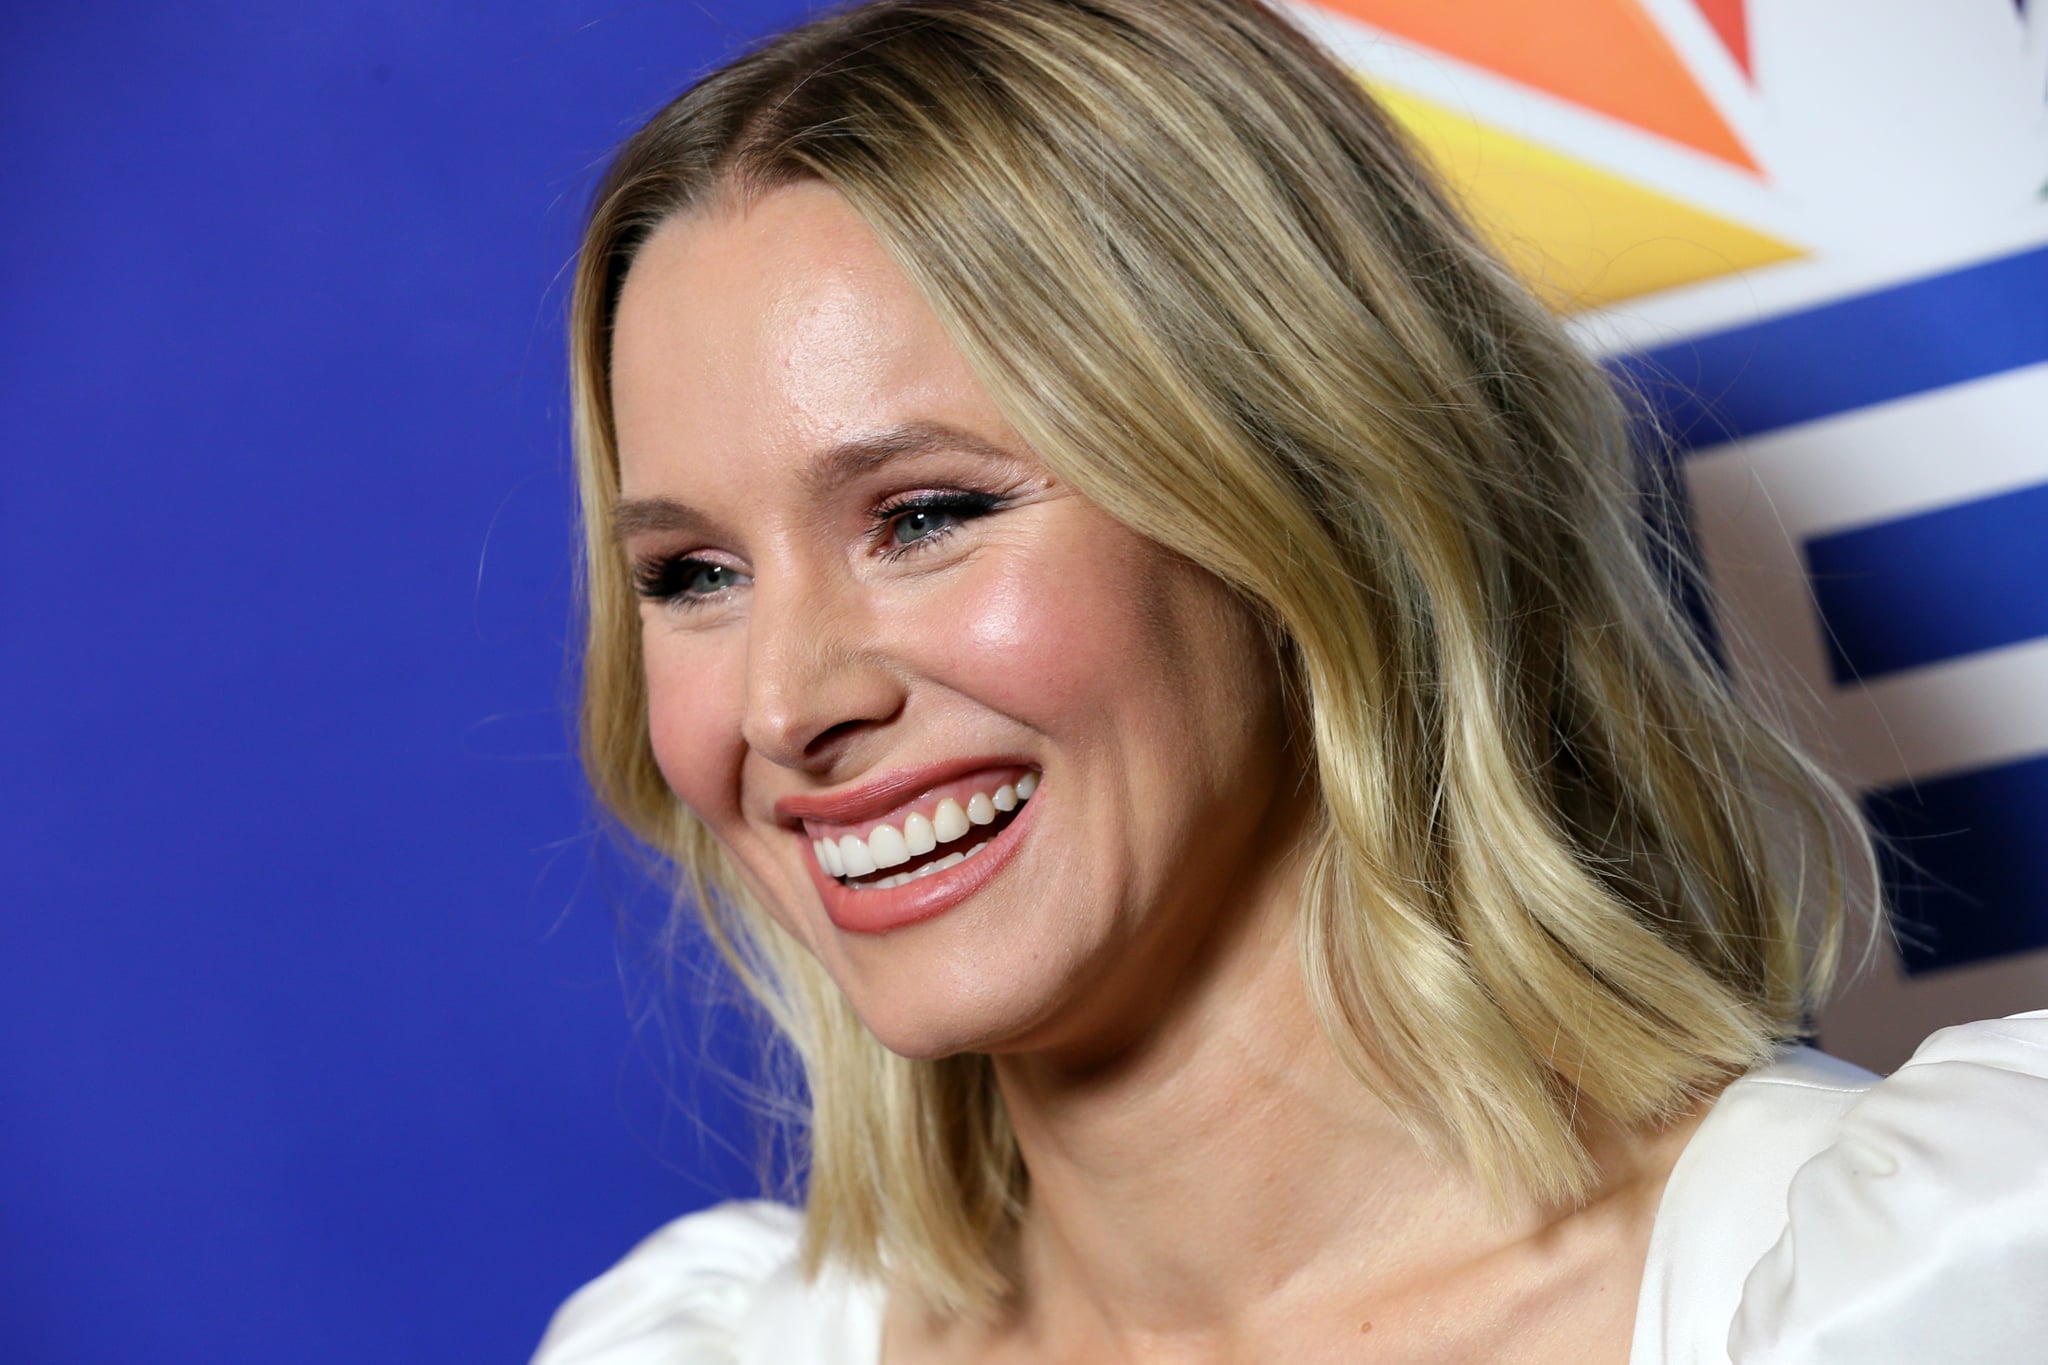 BEVERLY HILLS, CALIFORNIA - AUGUST 08: Kristen Bell attends the 2019 TCA NBC Press Tour Carpet at The Beverly Hilton Hotel on August 08, 2019 in Beverly Hills, California. (Photo by David Livingston/WireImage)